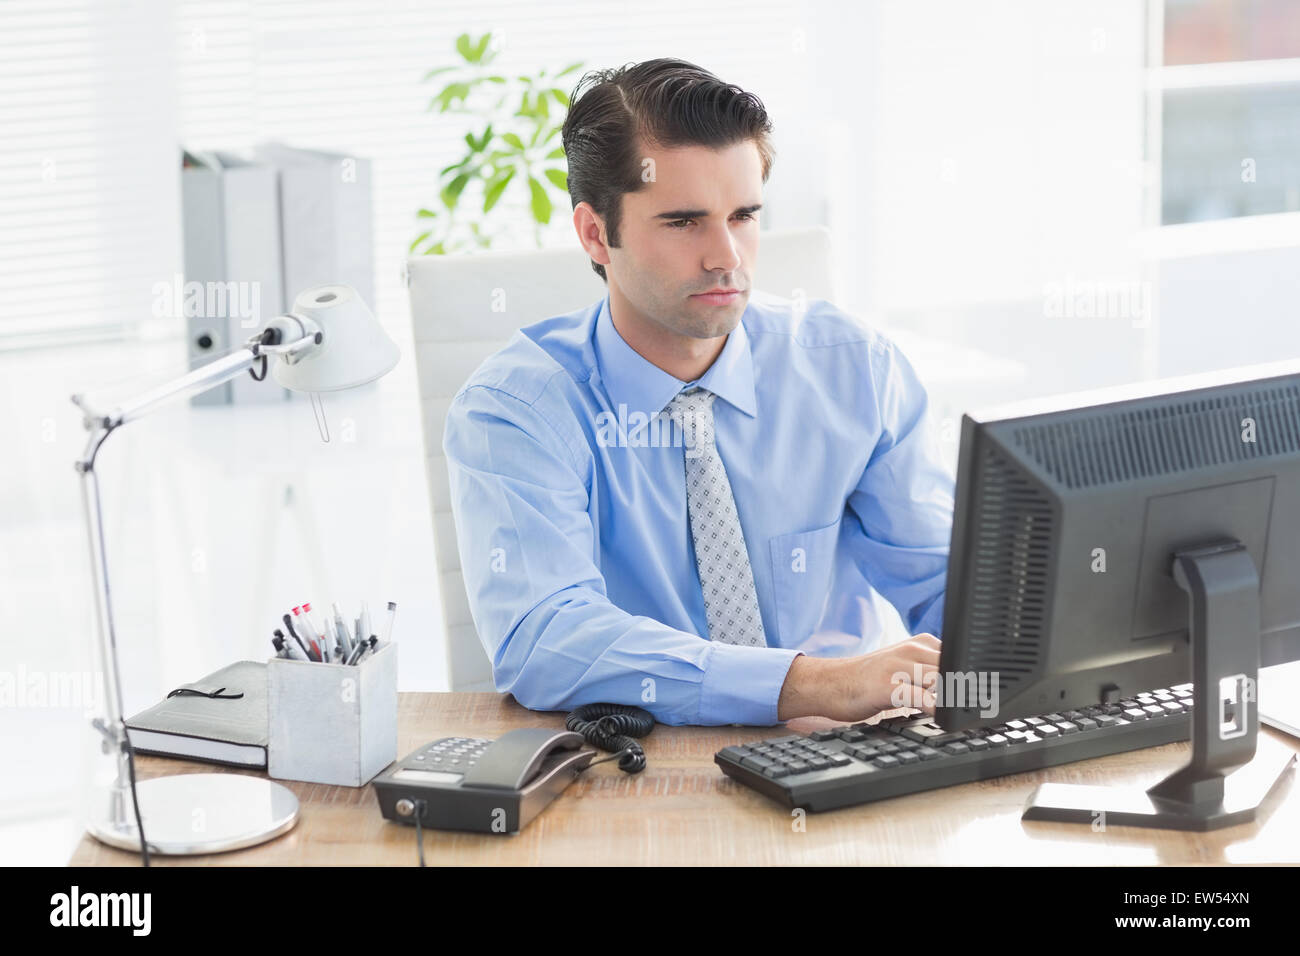 Concentrated businessman typing on the keyboard Stock Photo